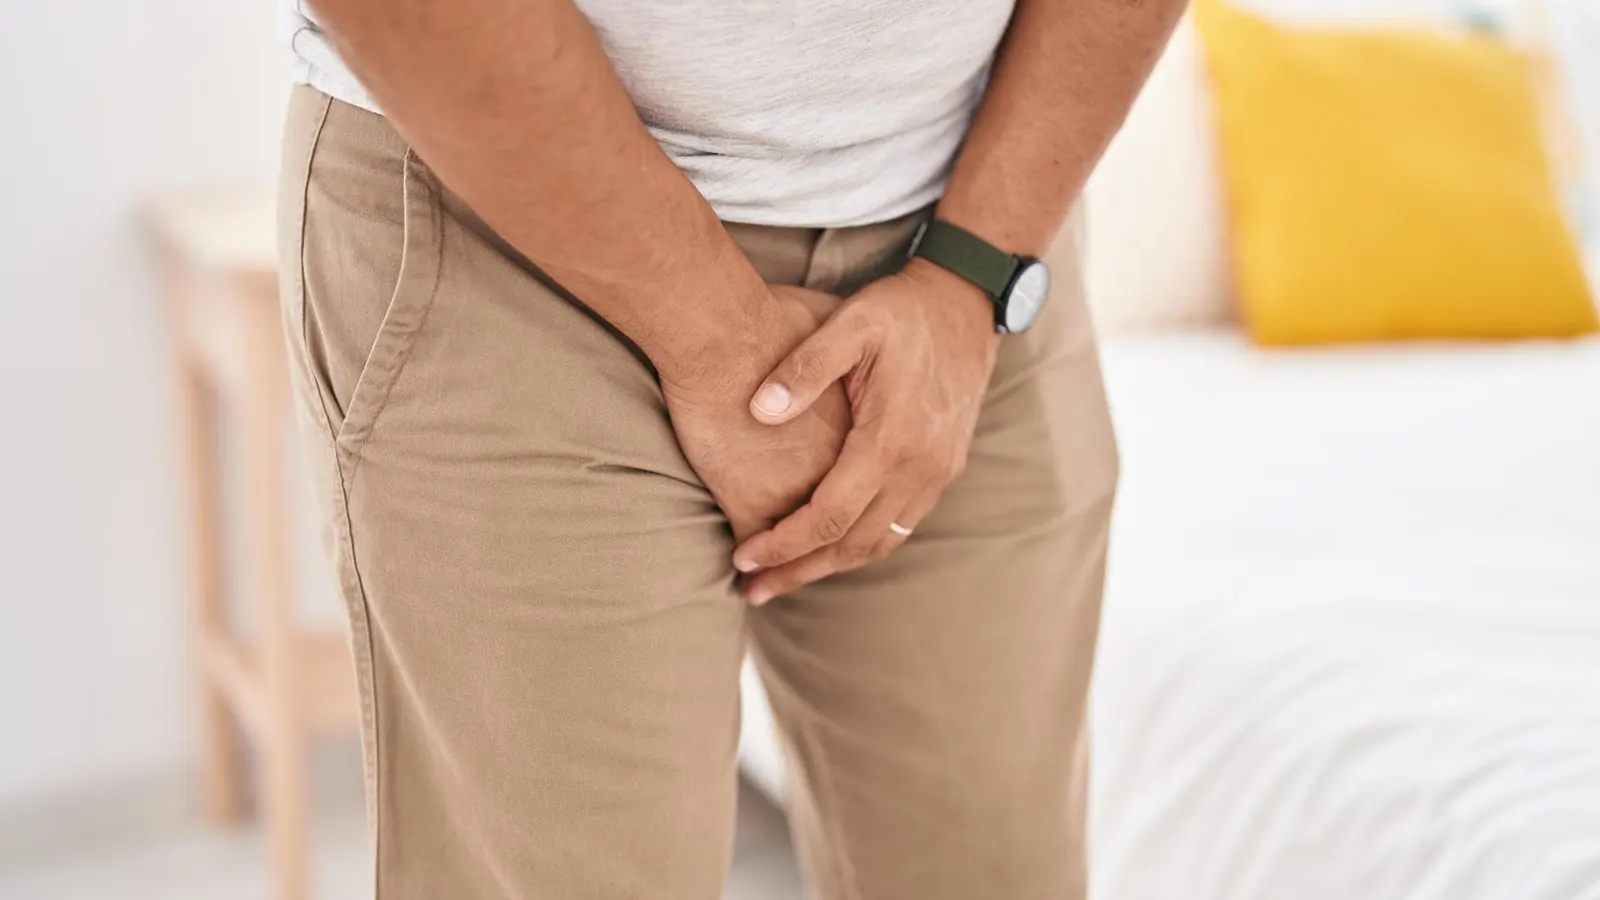 What is Penile Fracture?